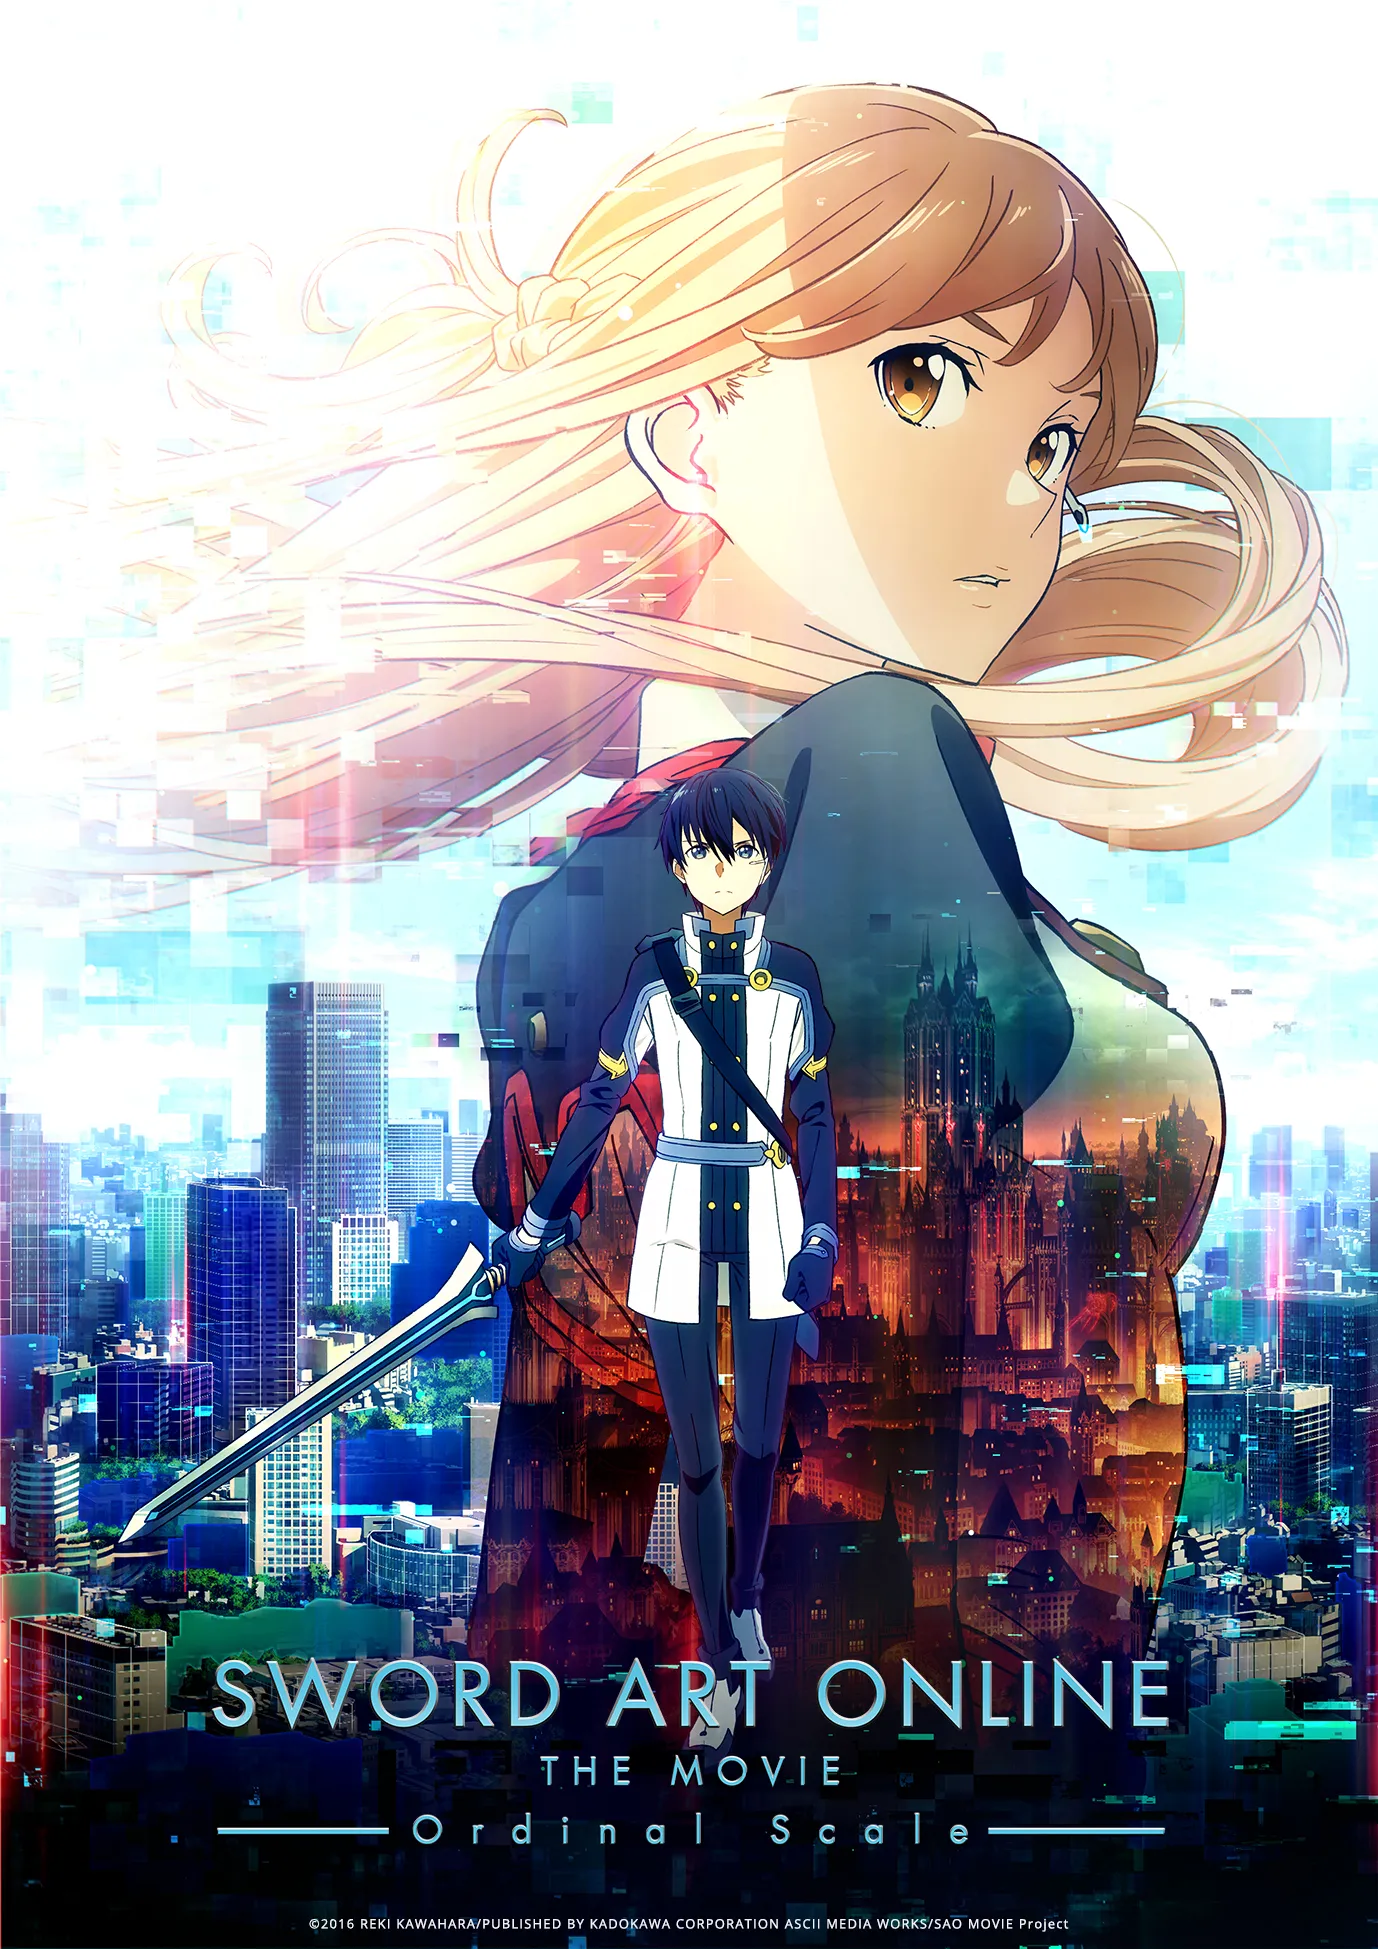 Official image of Sword Art Online The Movie -Ord Scale-